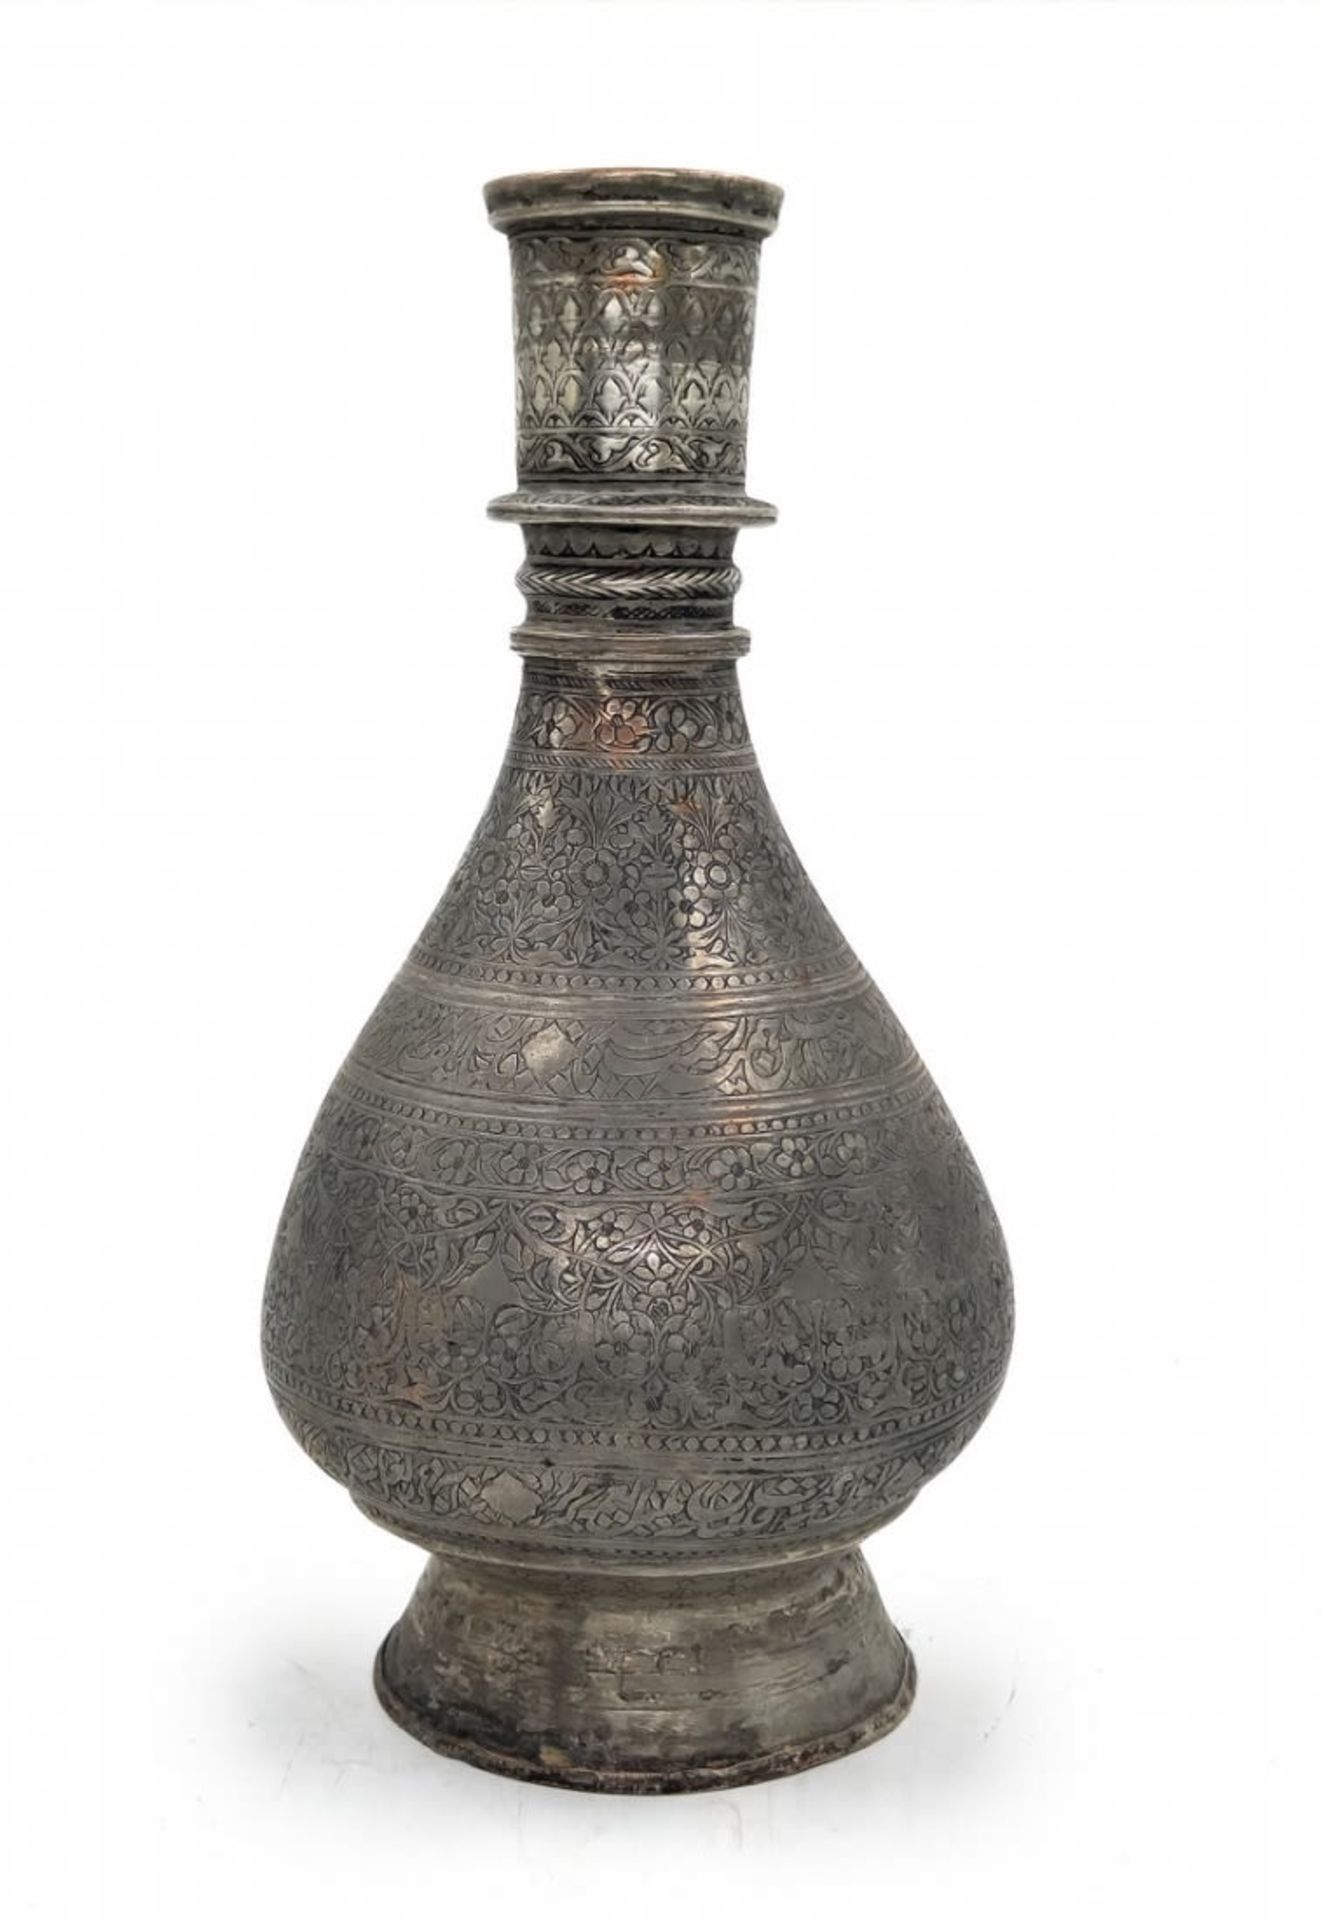 An antique Islamic hookah base, end of the 18th century., from the time of the Mughal Empire, - Image 3 of 7